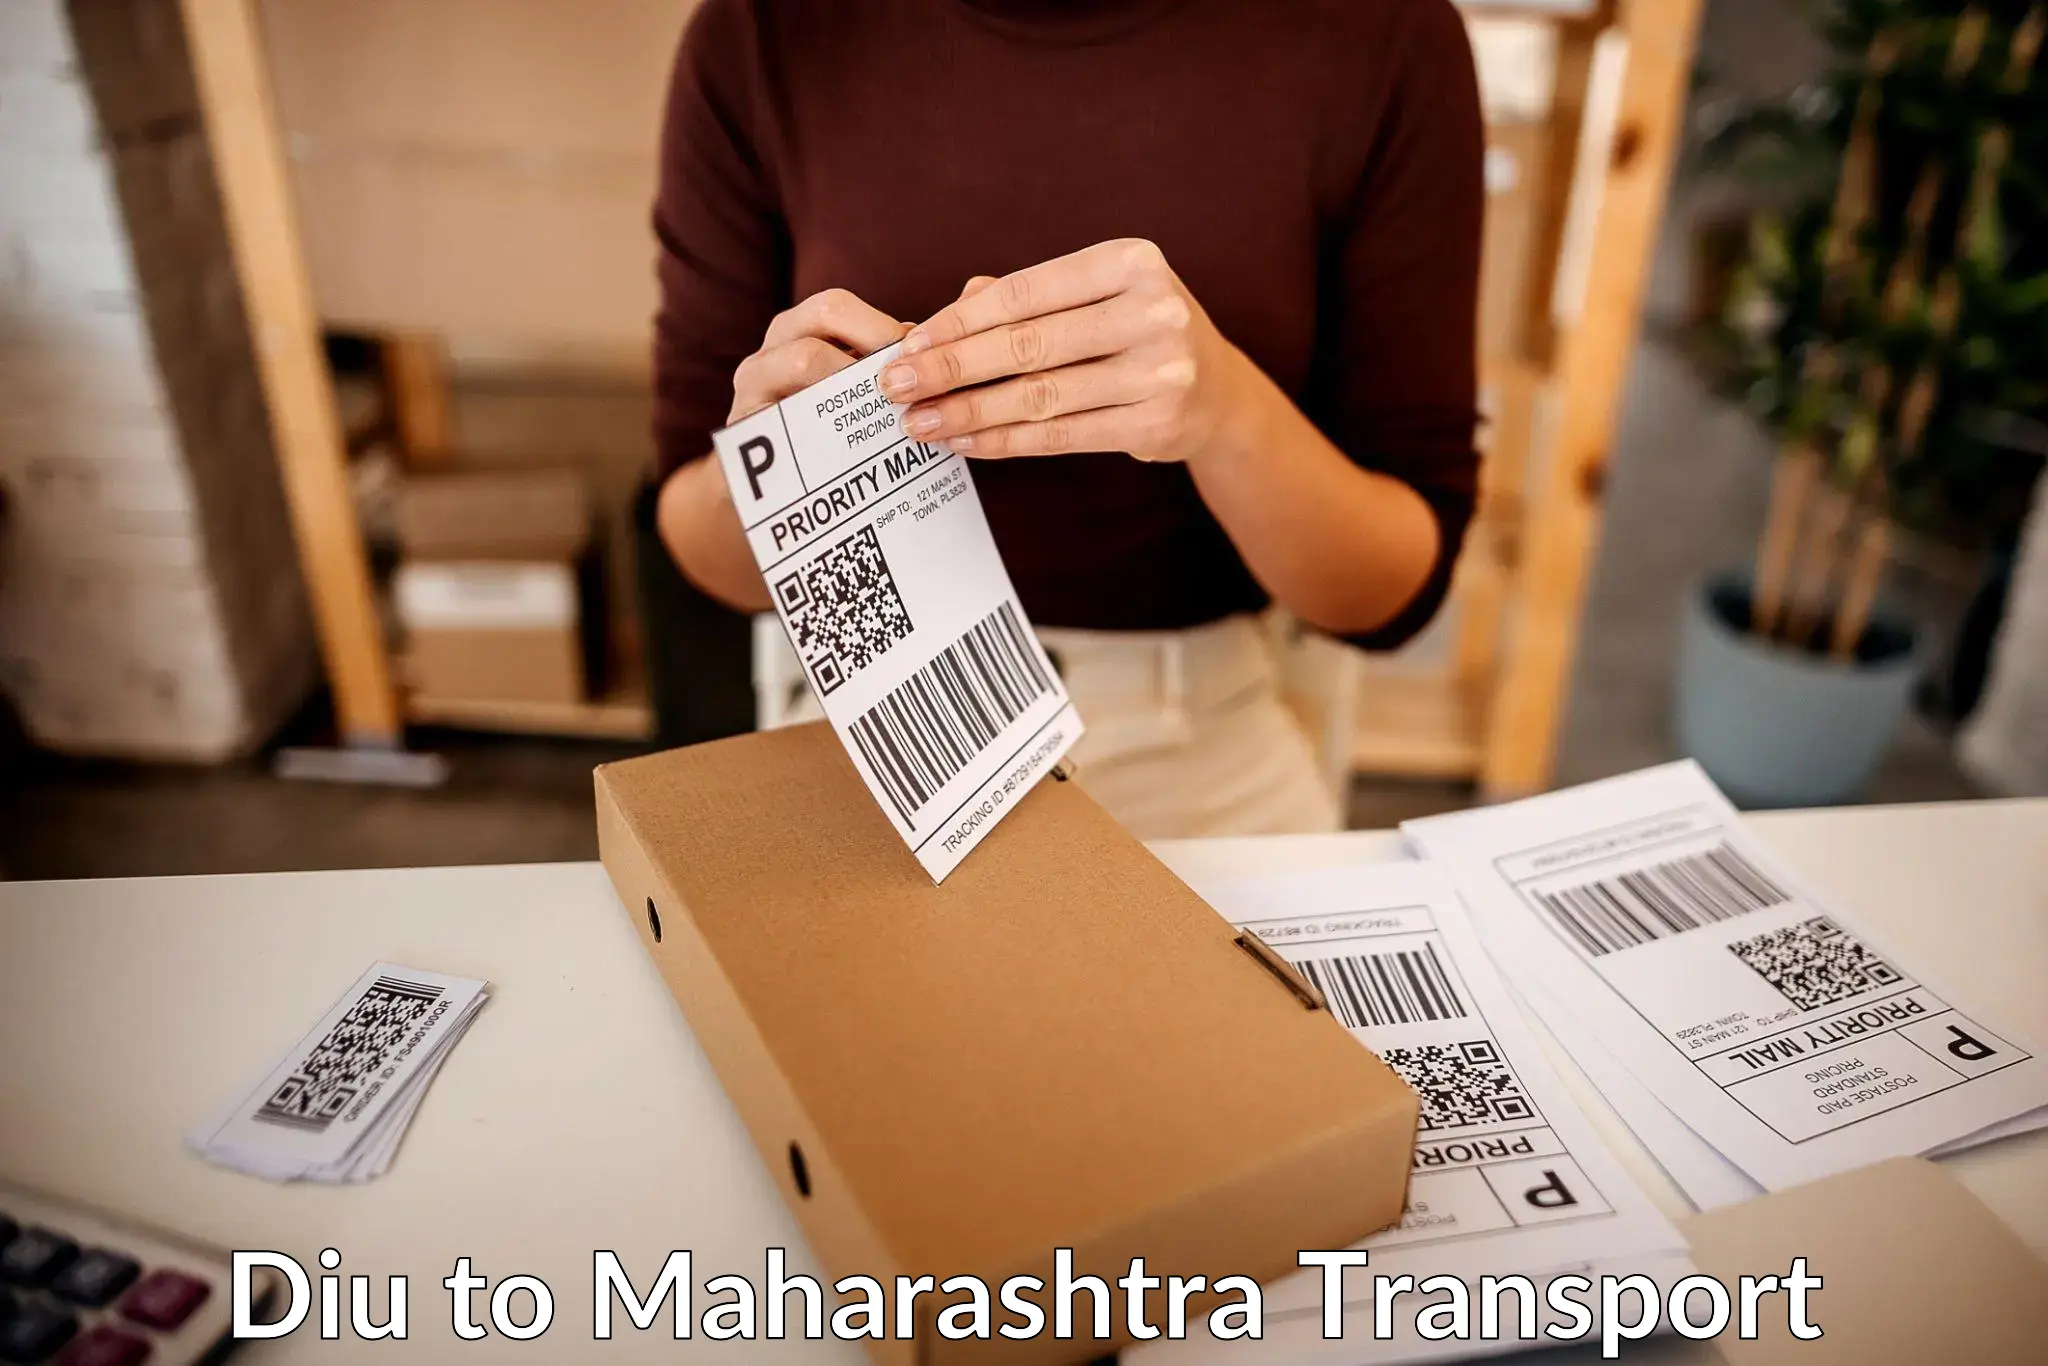 Domestic goods transportation services Diu to Institute of Chemical Technology Mumbai